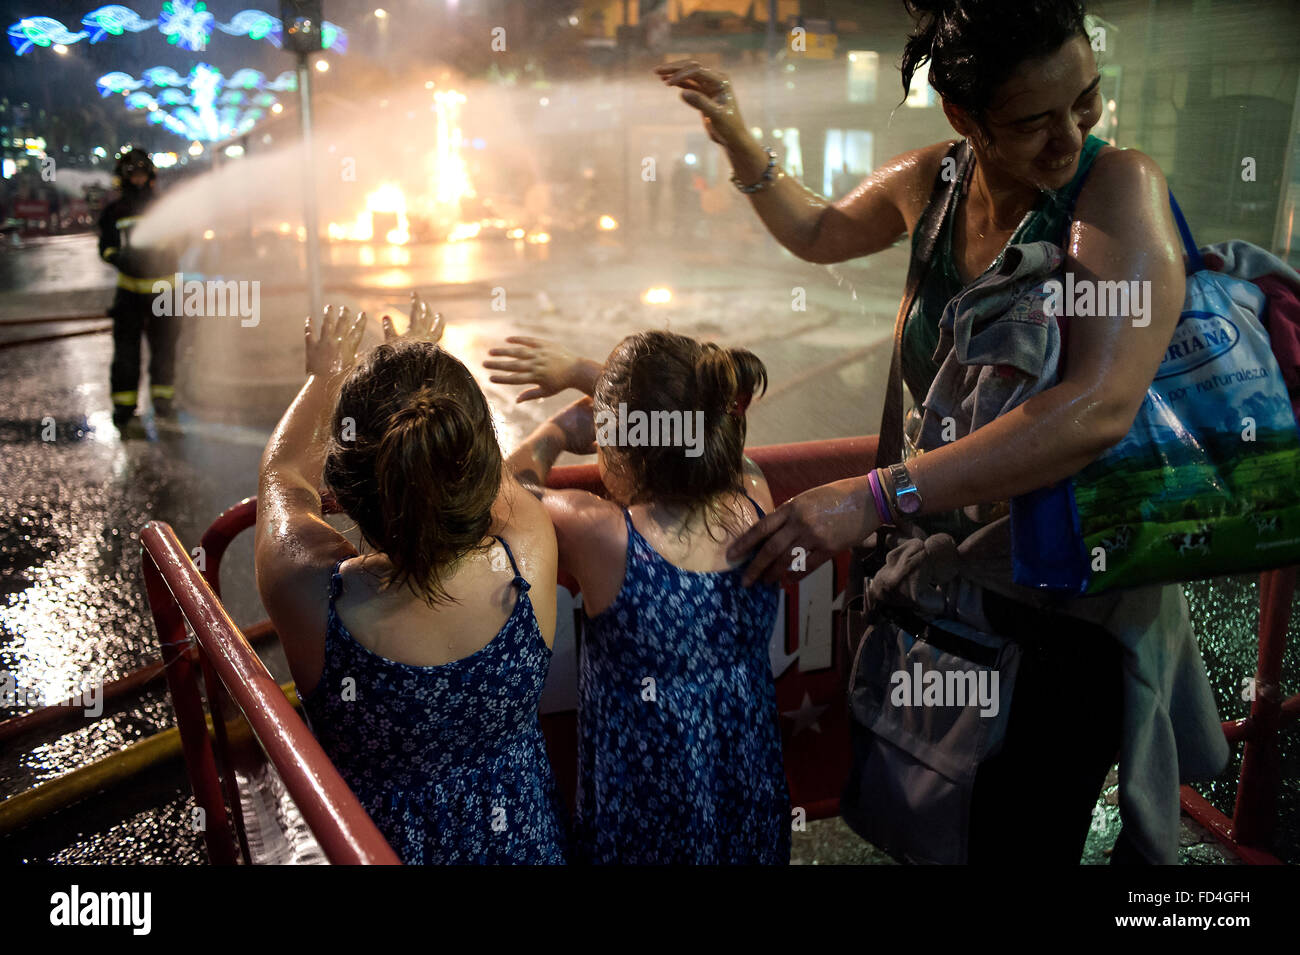 A firefighter wets a mother with her daughters during the night cremá the bonfires of San Juan. Stock Photo